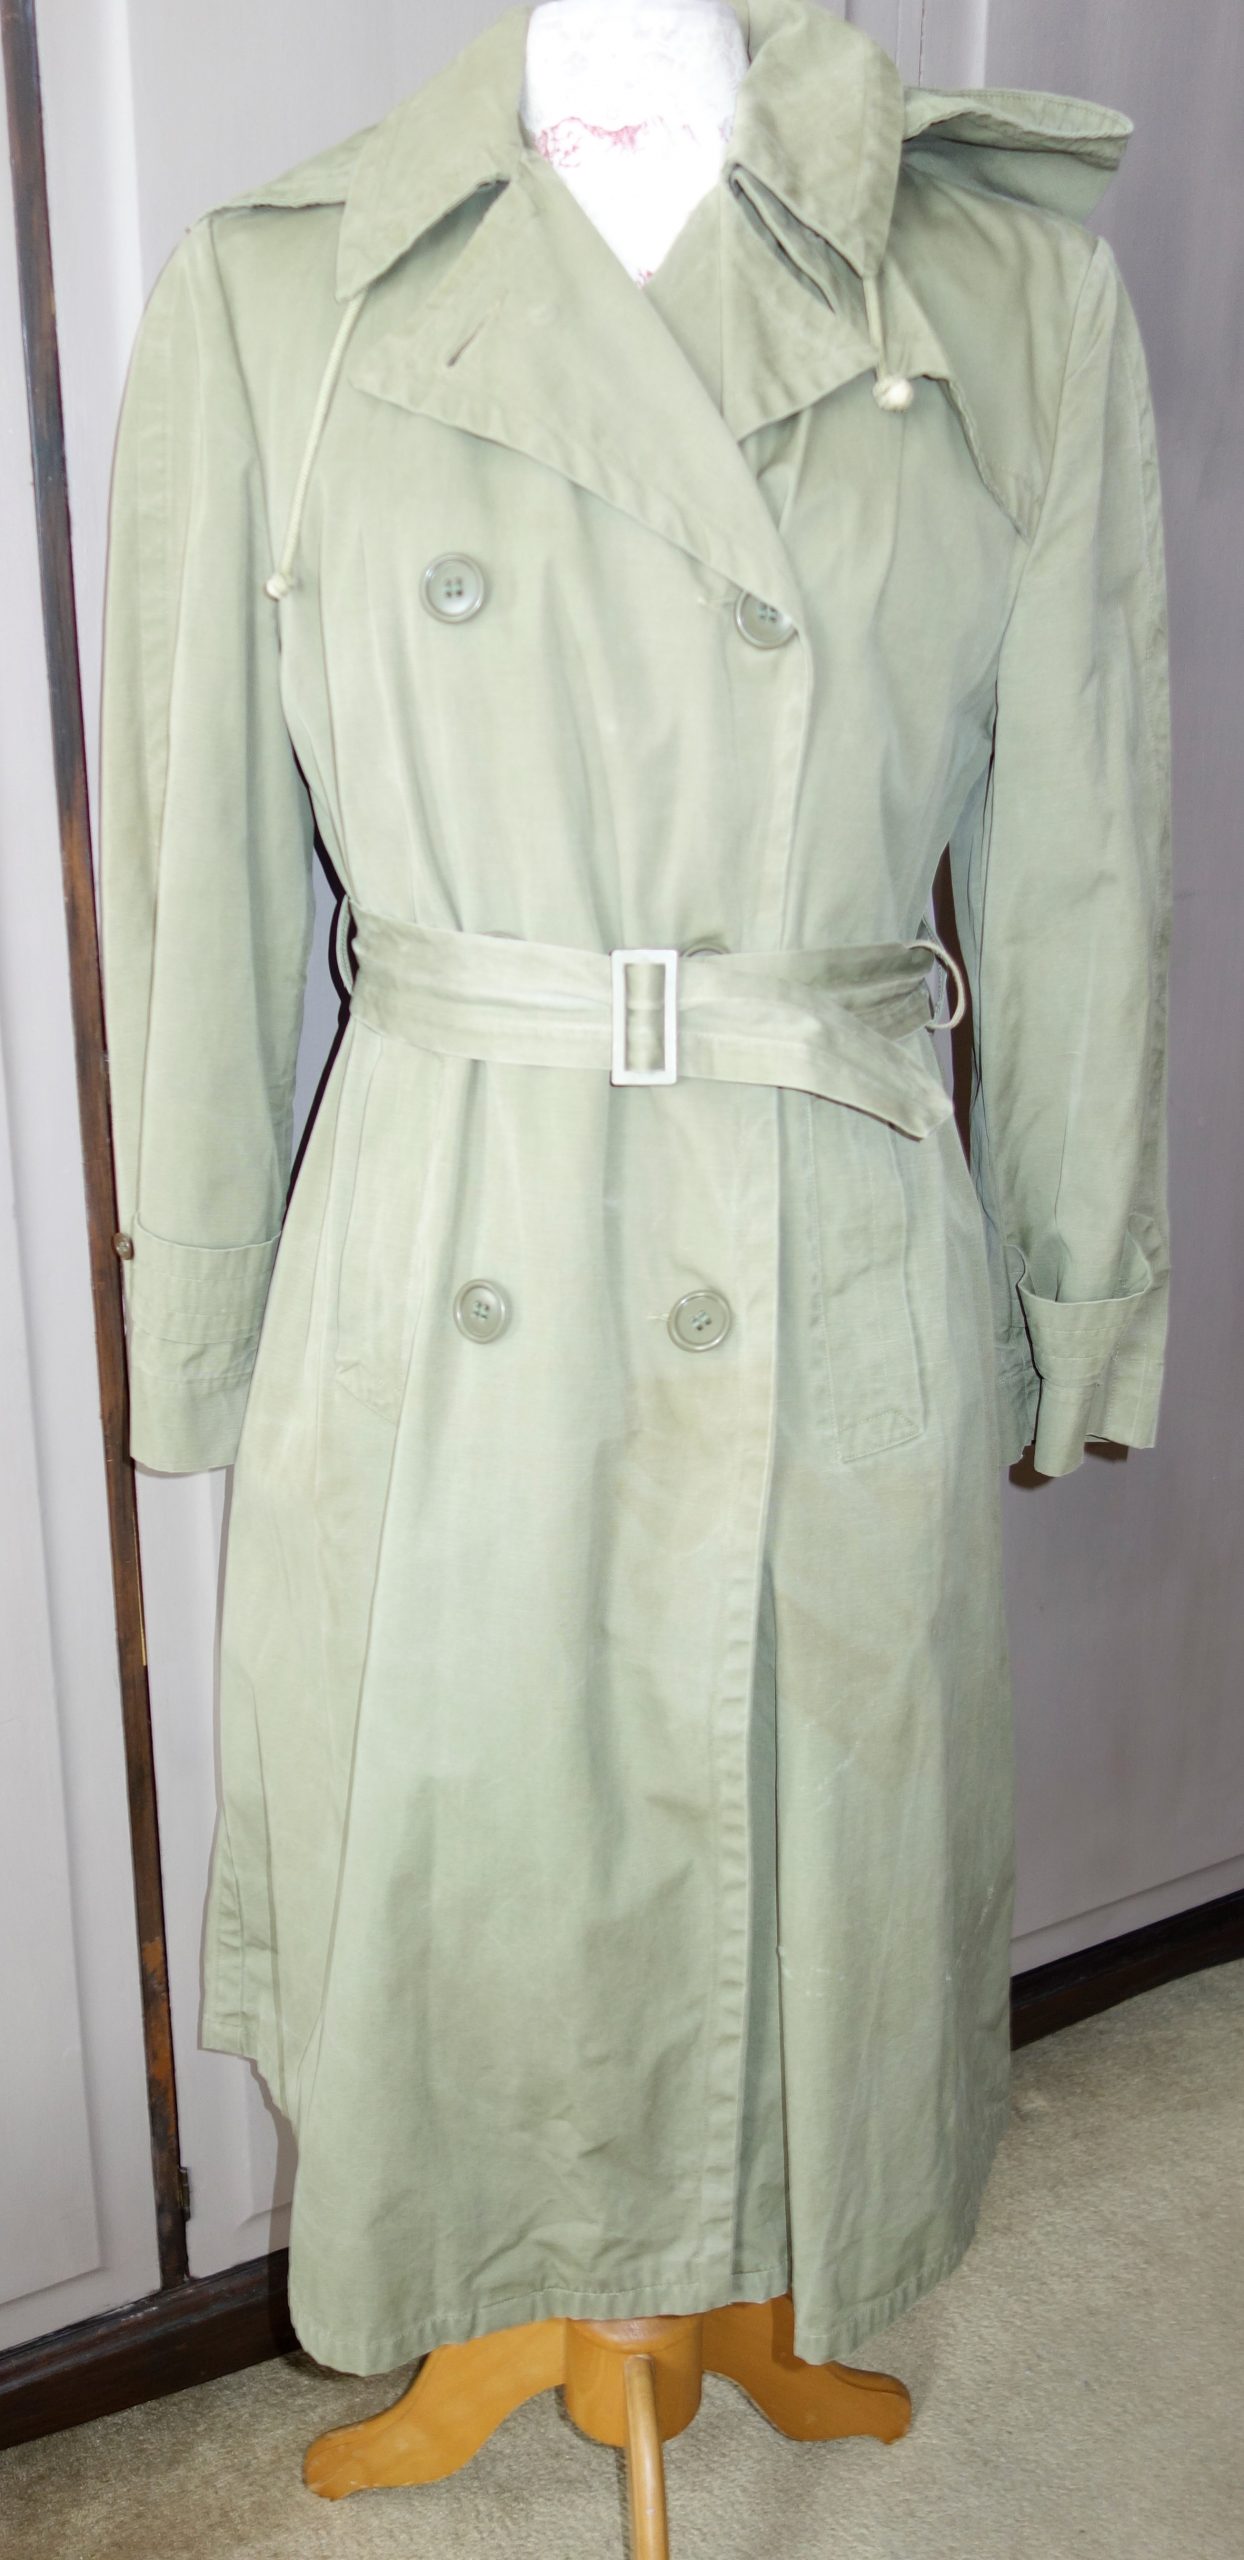 WAC WOMENS ARMY CORPS RAINCOAT WITH HOOD,LINER AND BELT. GOOD COND ...